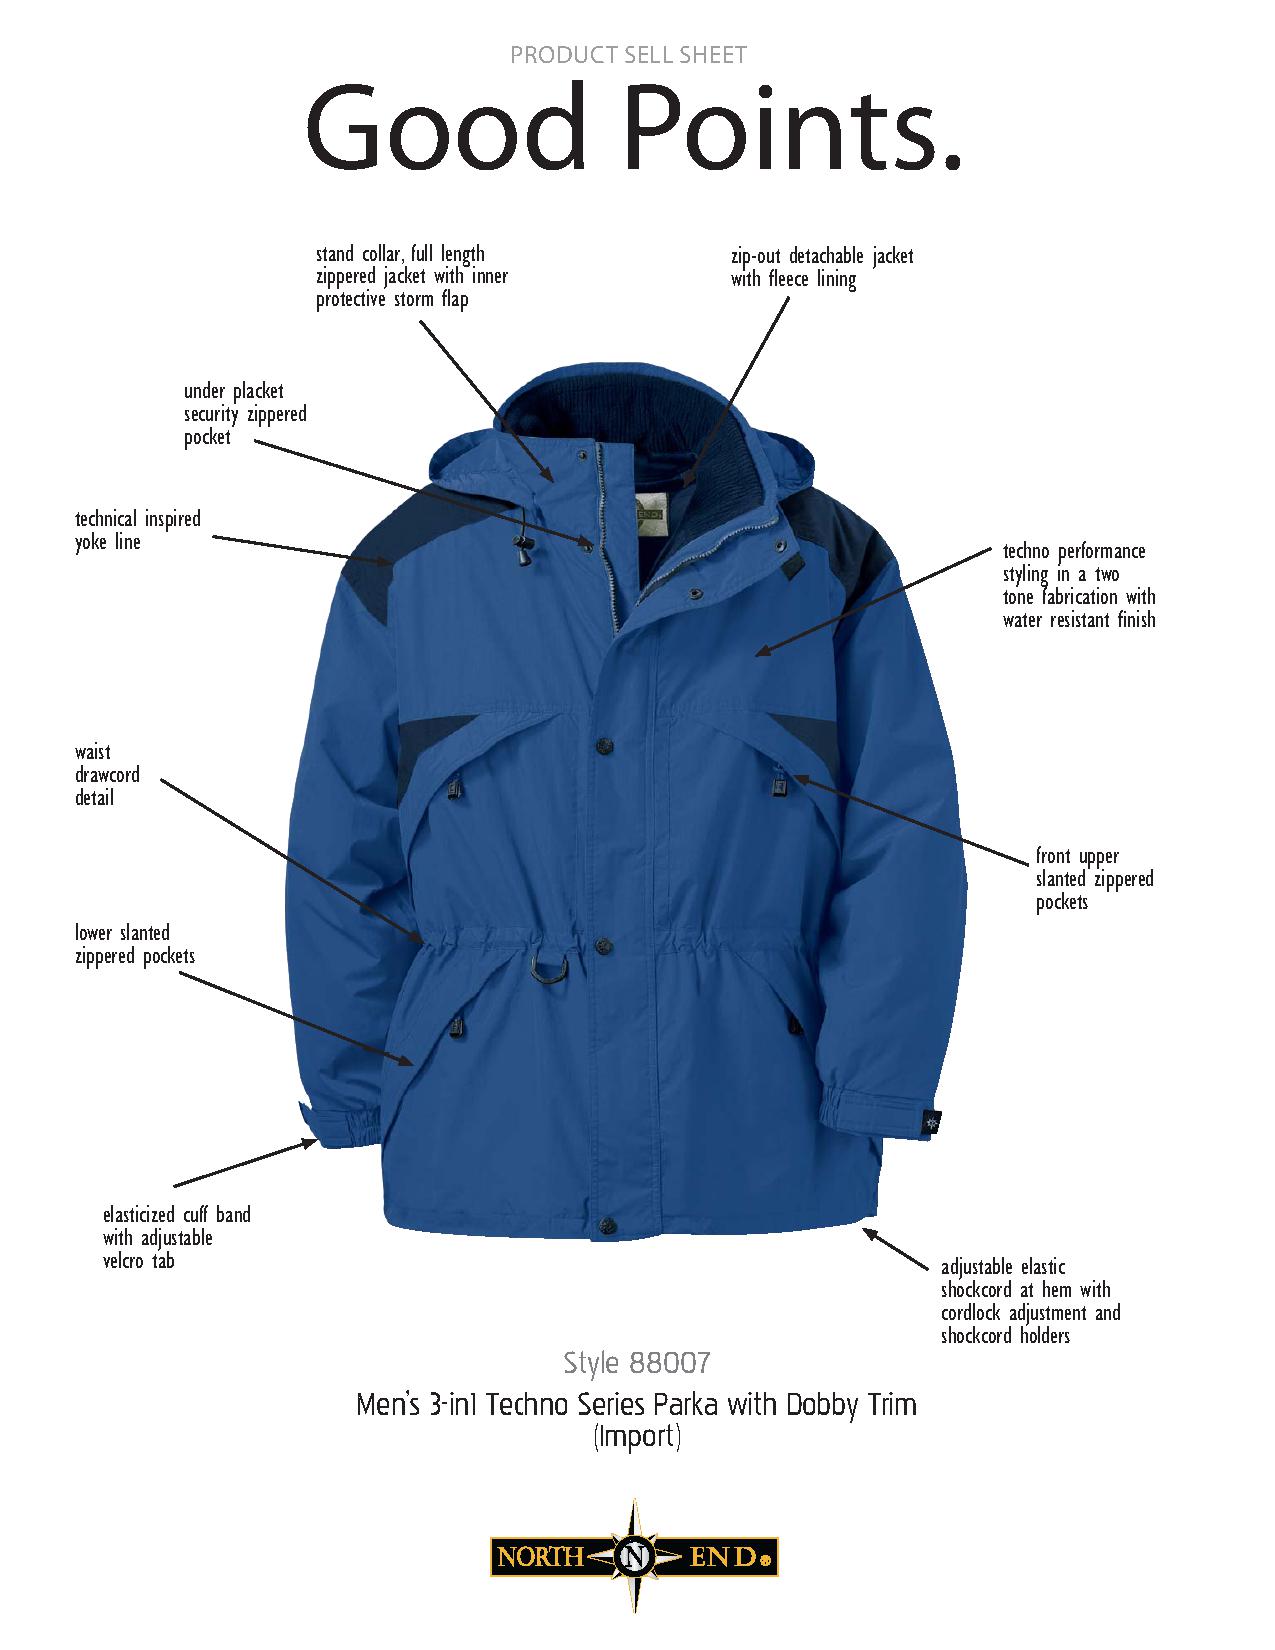 North End 88007 - Men's 3-in-1 Parka with Dobby Trim